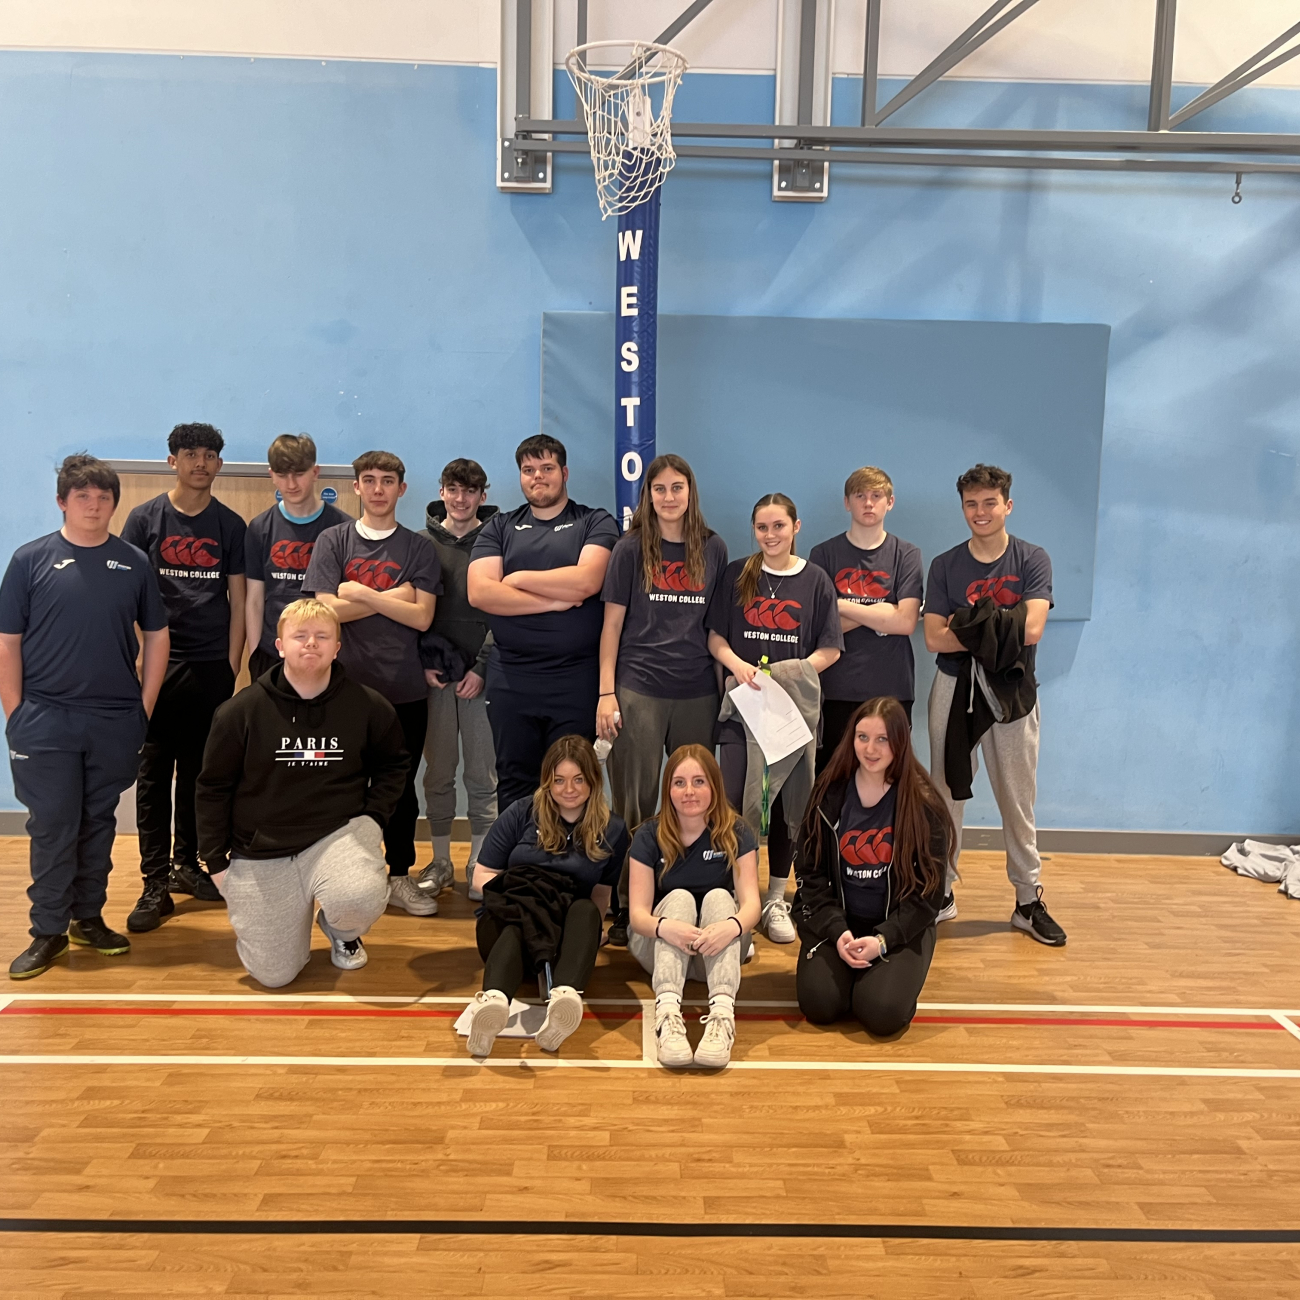 Our level 2 sports students posing for a picture in our sports hall